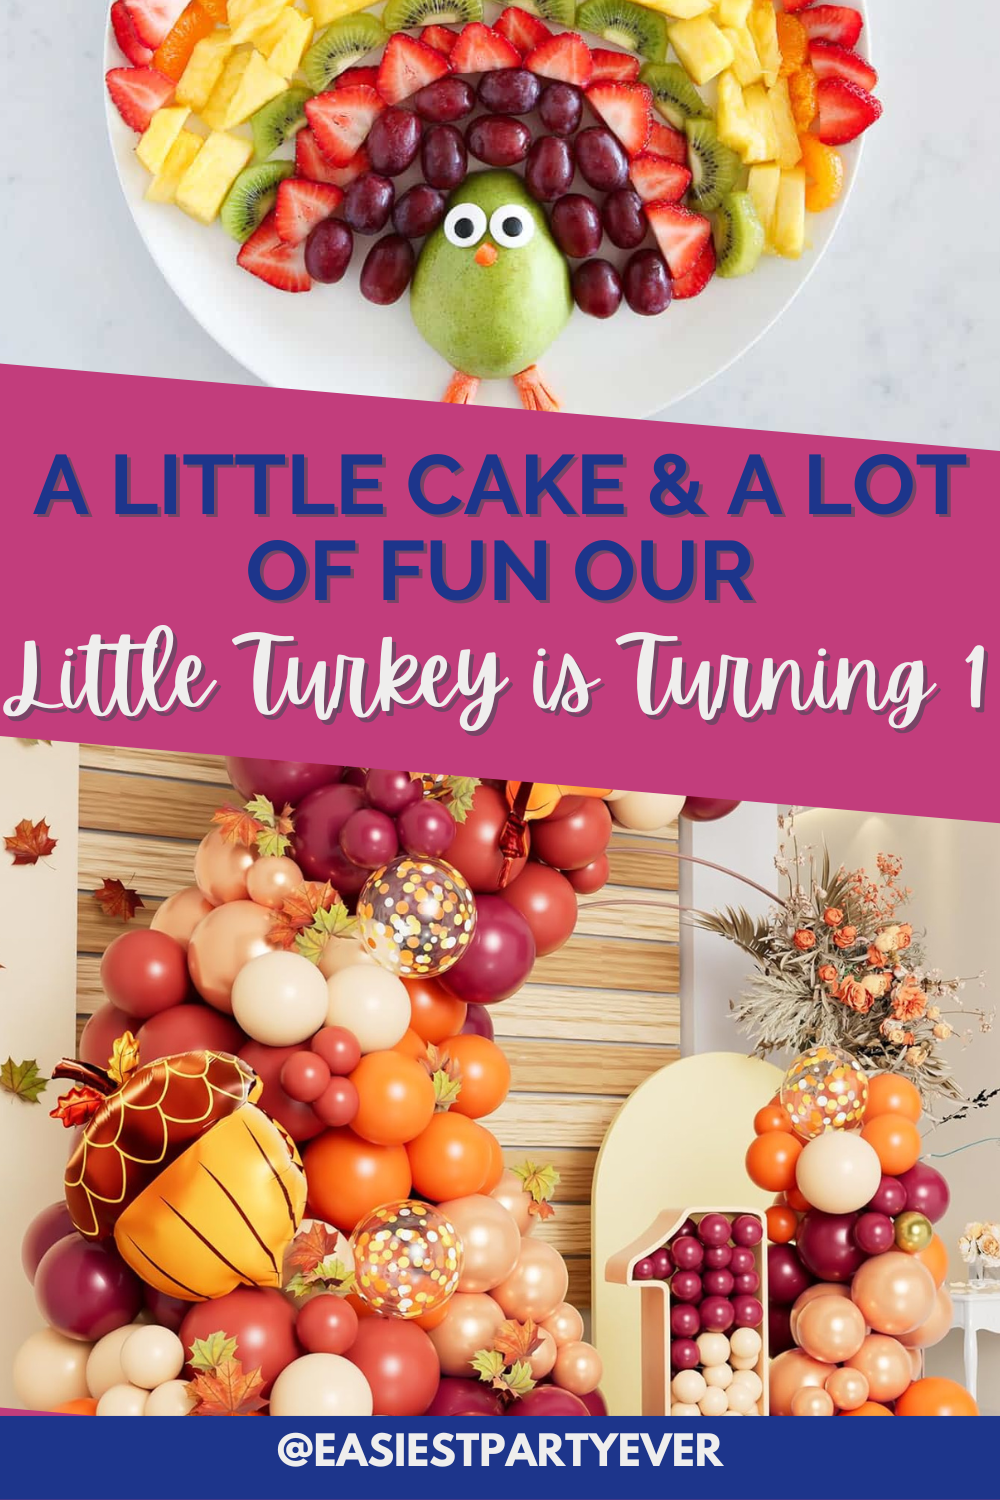 A Little Cake & Lot of Fun, Our Little Turkey is Turning ONE